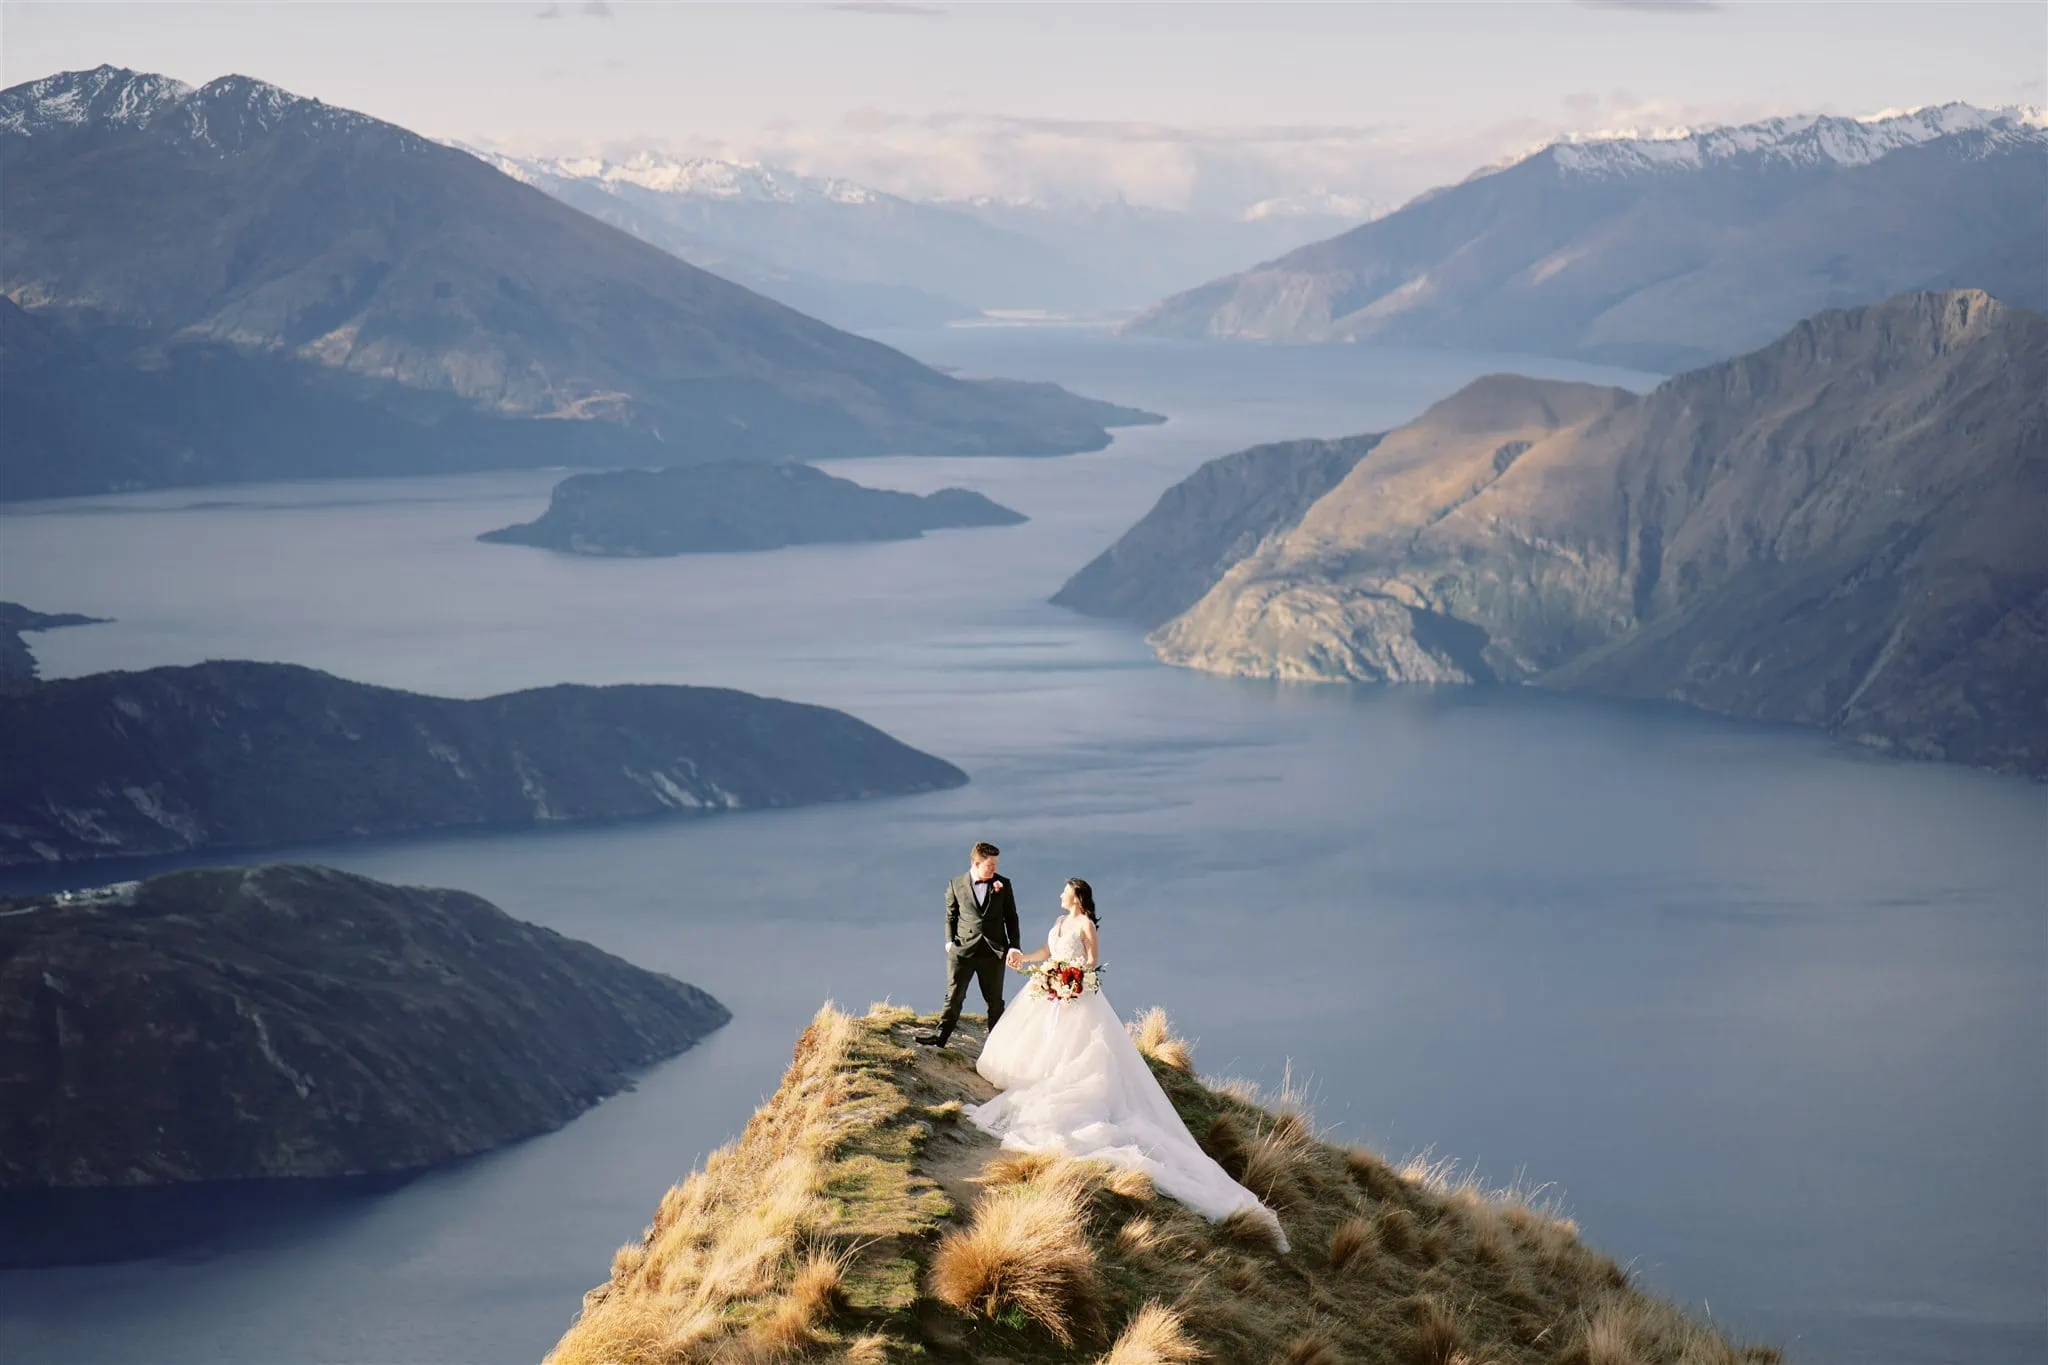 Queenstown Elopement Heli Wedding Photographer クイーンズタウン結婚式 | A man and woman embracing on a cliff overlooking a body of water during their elopement.